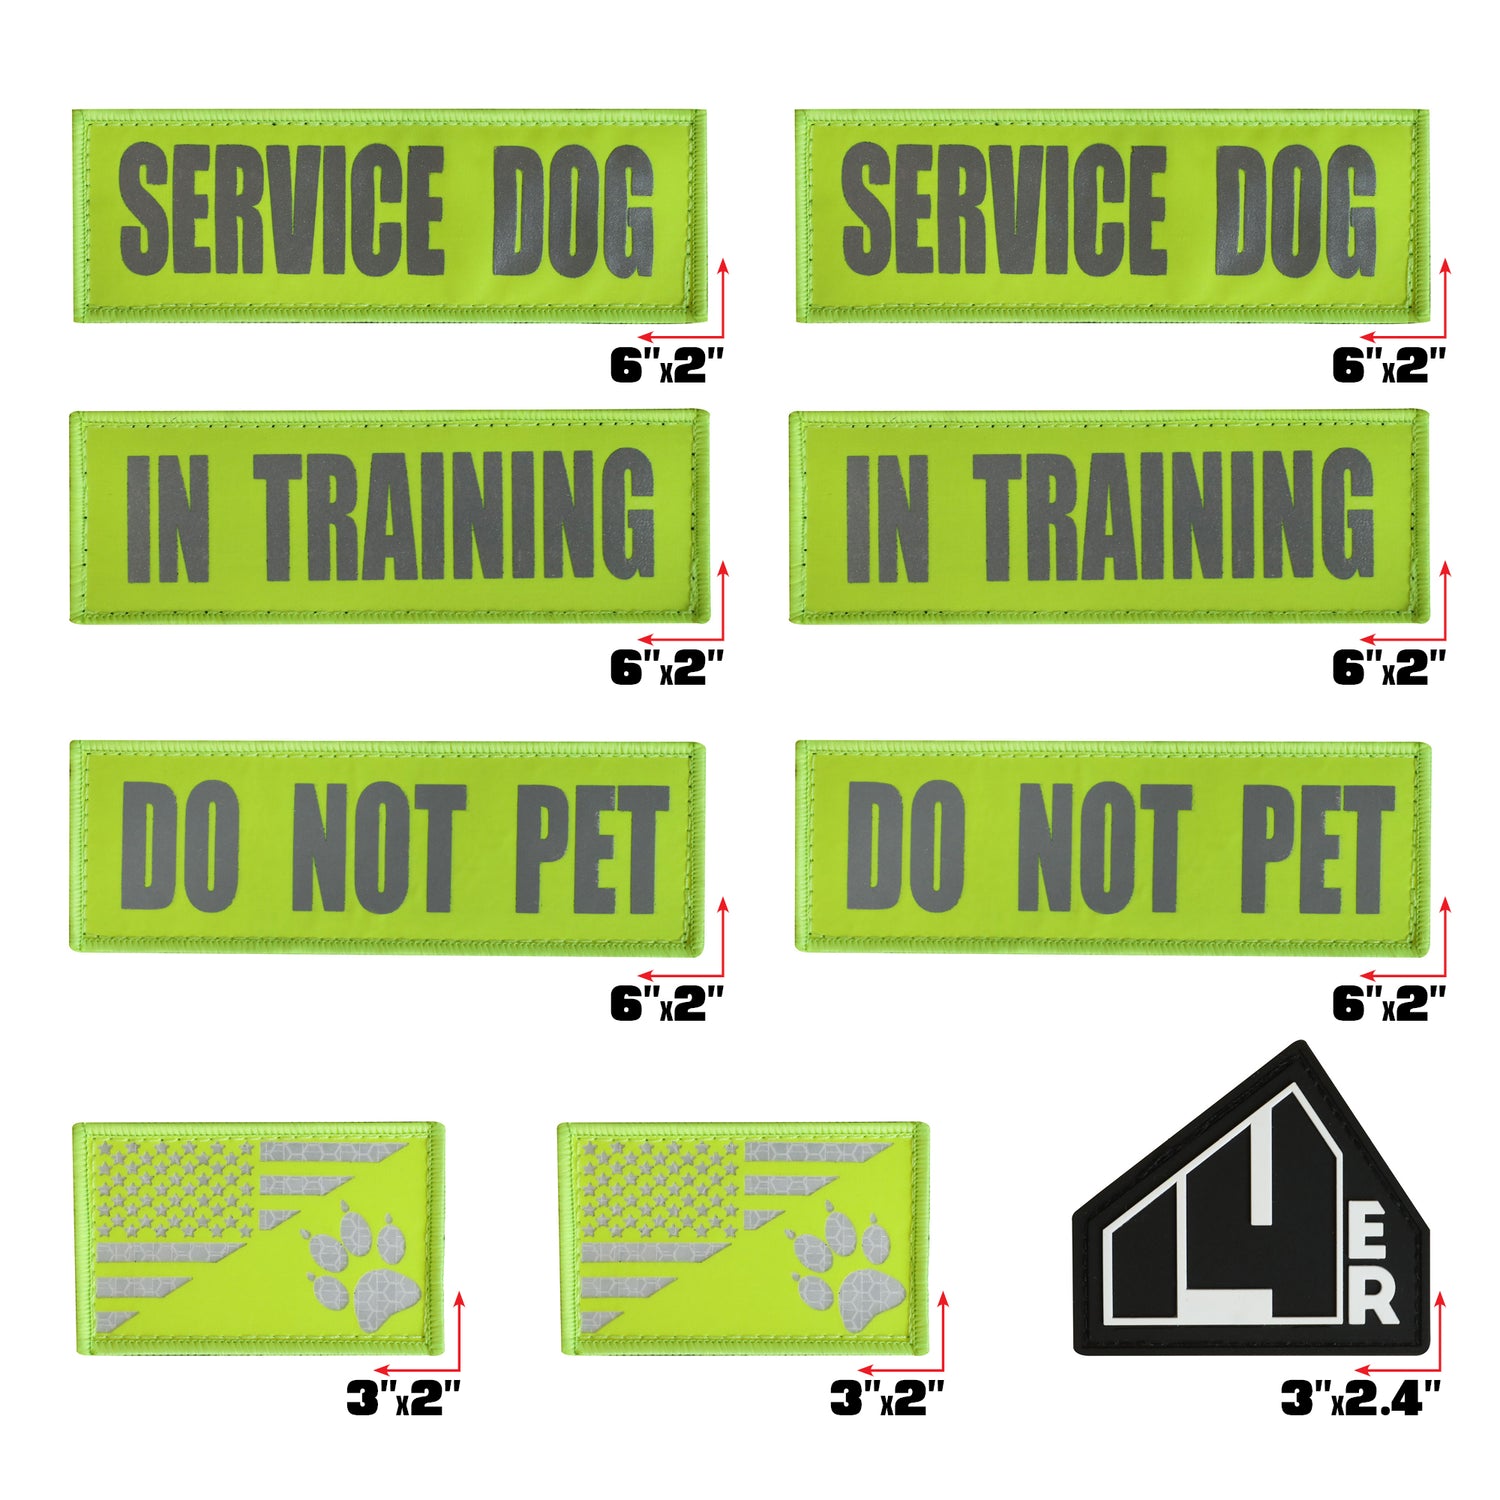 14er Tactical Reflective Service Dog Patches 9-Pack Hook & Loop, 6inch x 2Inch Embroidery & High Visibility Perfect for Harness, Vest, Collar, L